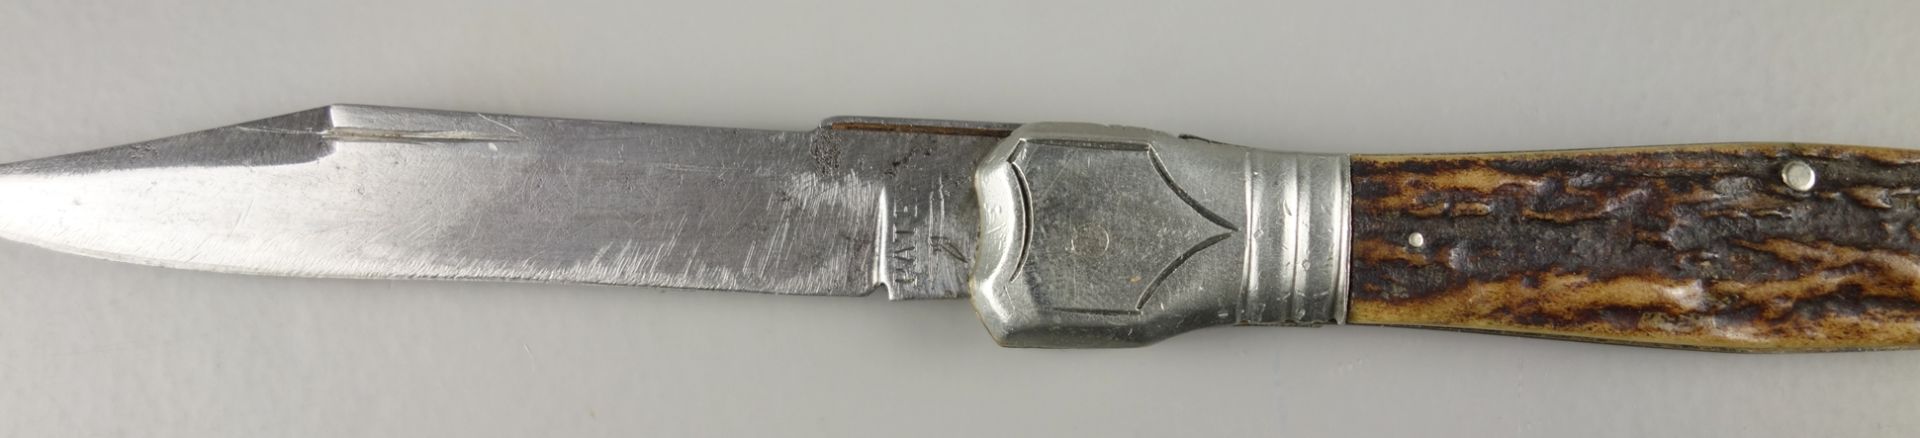 6 pocket knives and 3 knives, mostly with antler handles, mid and 2nd half 20th cent - Image 3 of 3